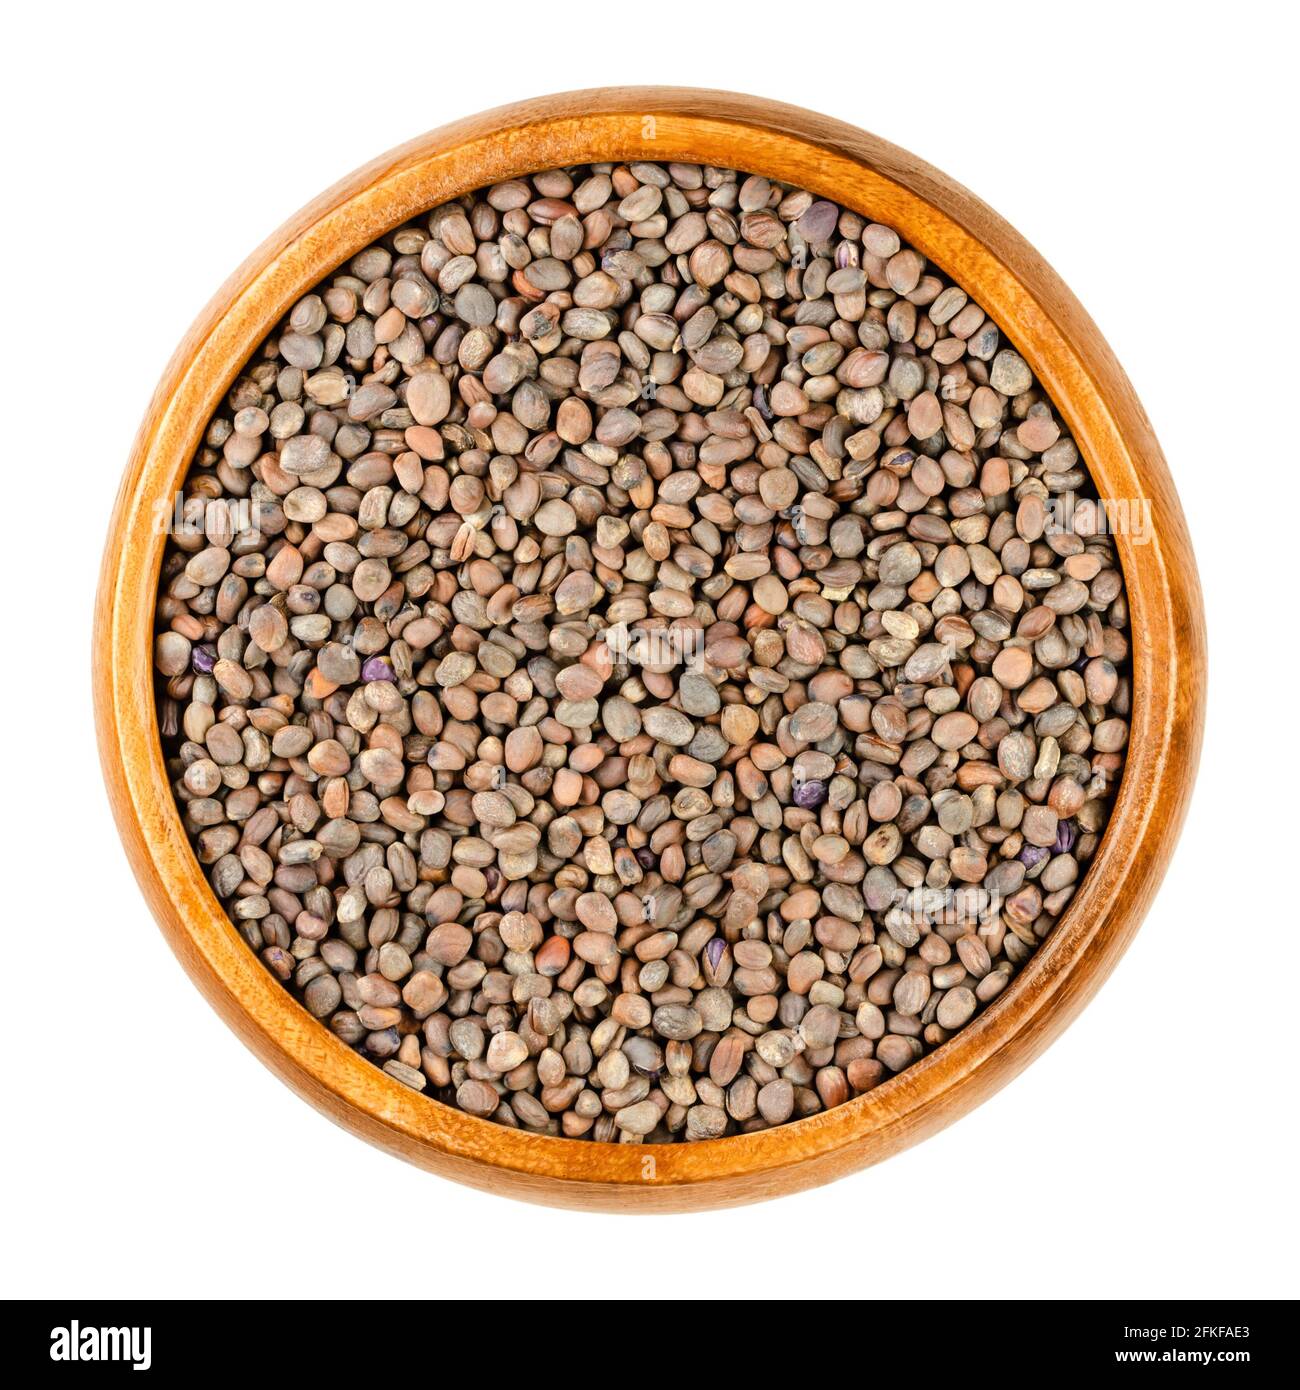 Red radish seeds, in a wooden bowl. Raphanus sativus, an edible root vegetable. Seeds for sprouting red and purple leaved radish. Close-up, from above Stock Photo